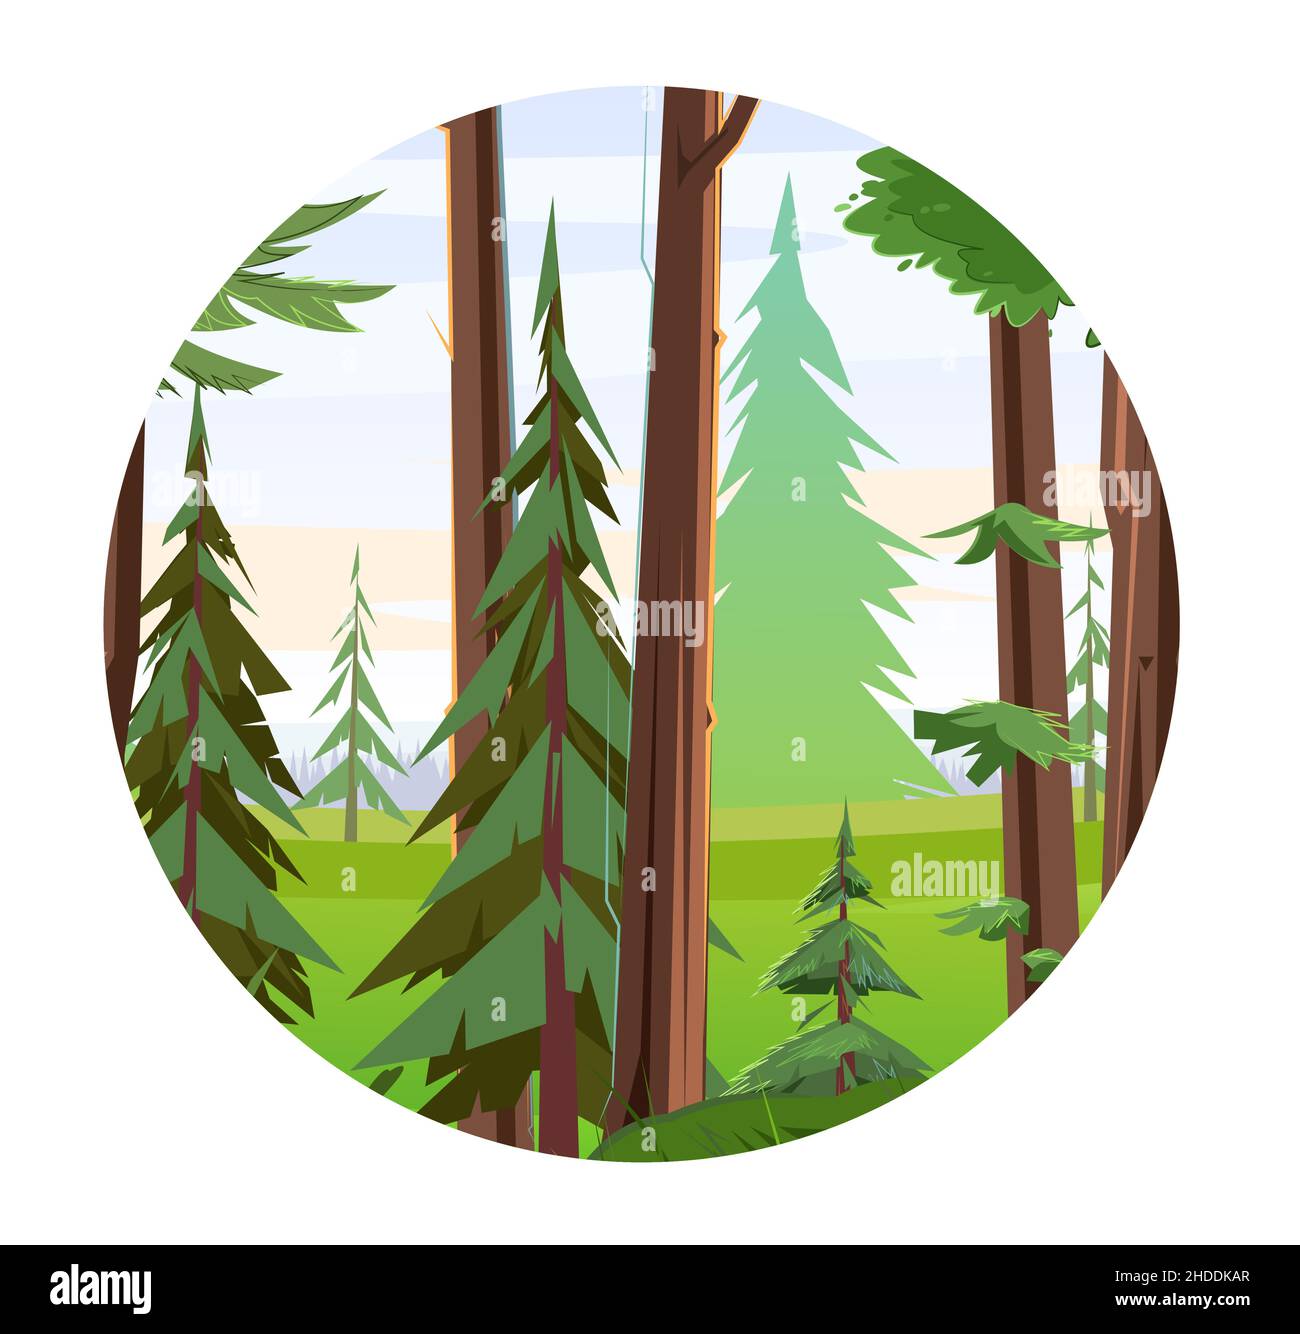 Pine tree. Little natural landscape. Illustration in cartoon style flat design Isolated on white background. Vector Stock Vector